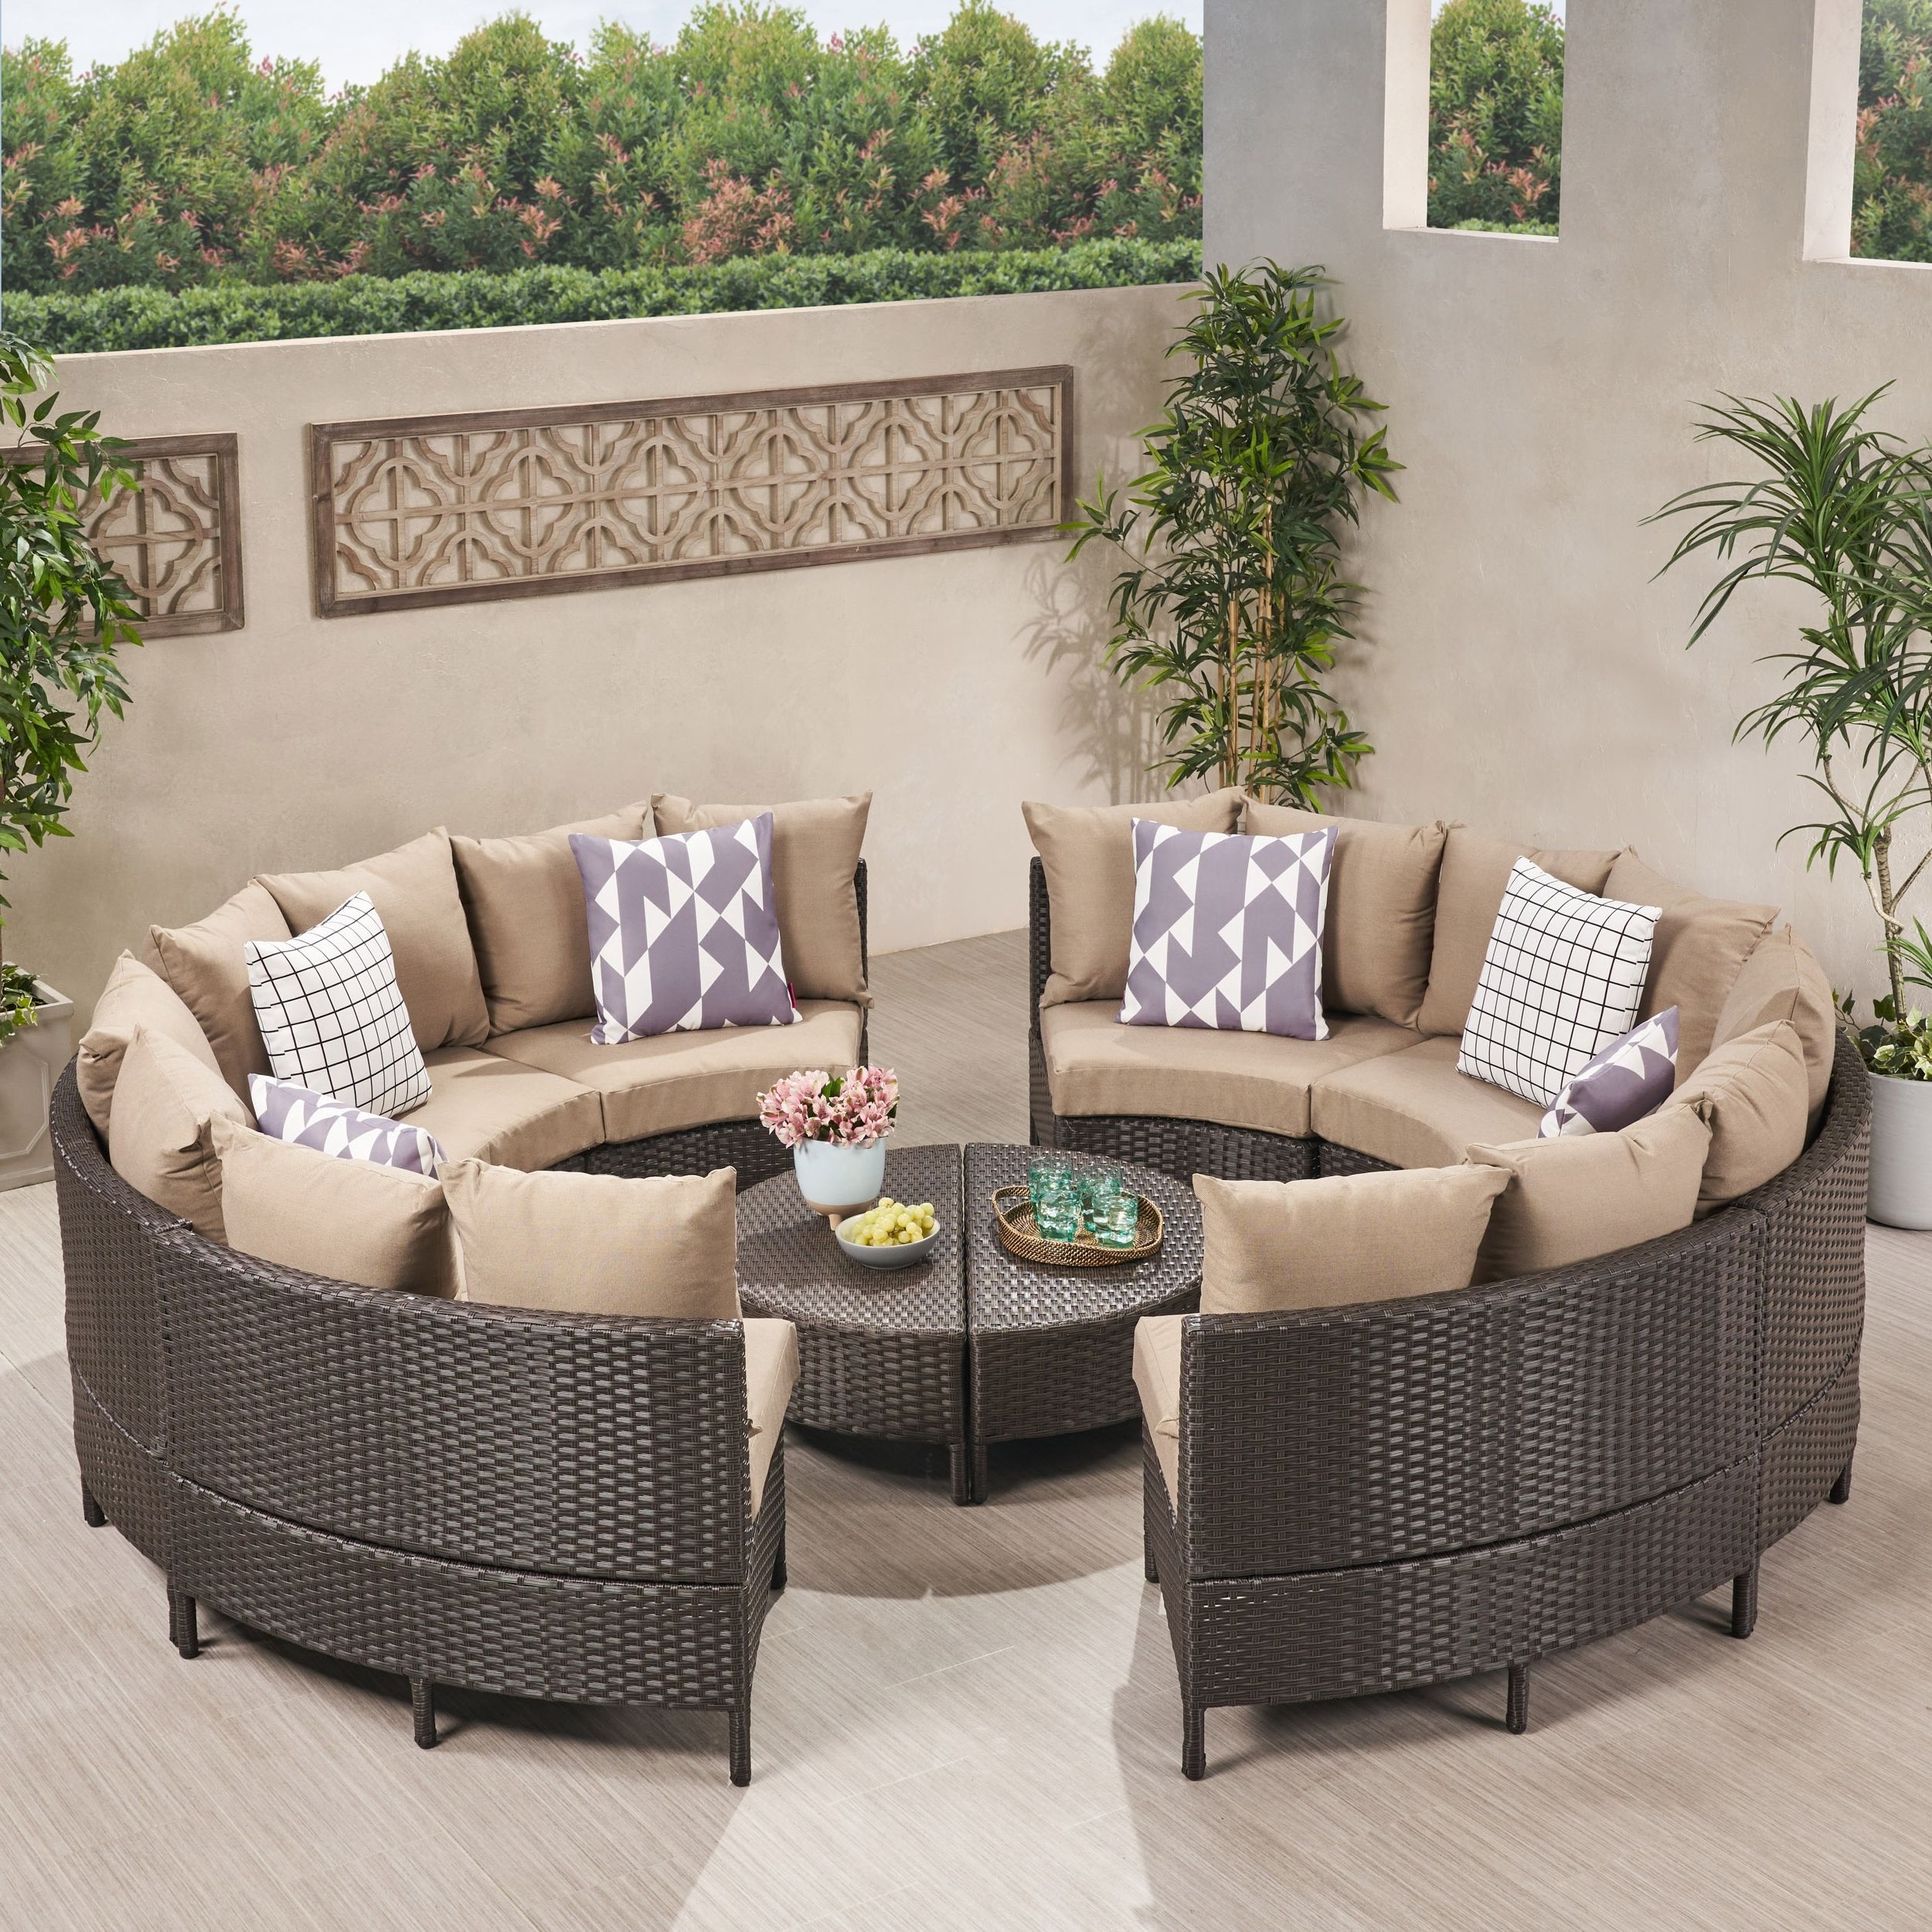 Newton All Weather Wicker Sectional Sofa Setchristopher Knight Home –  On Sale – – 20598608 With Regard To Most Up To Date Outdoor Rattan Sectional Sofas With Coffee Table (View 9 of 15)